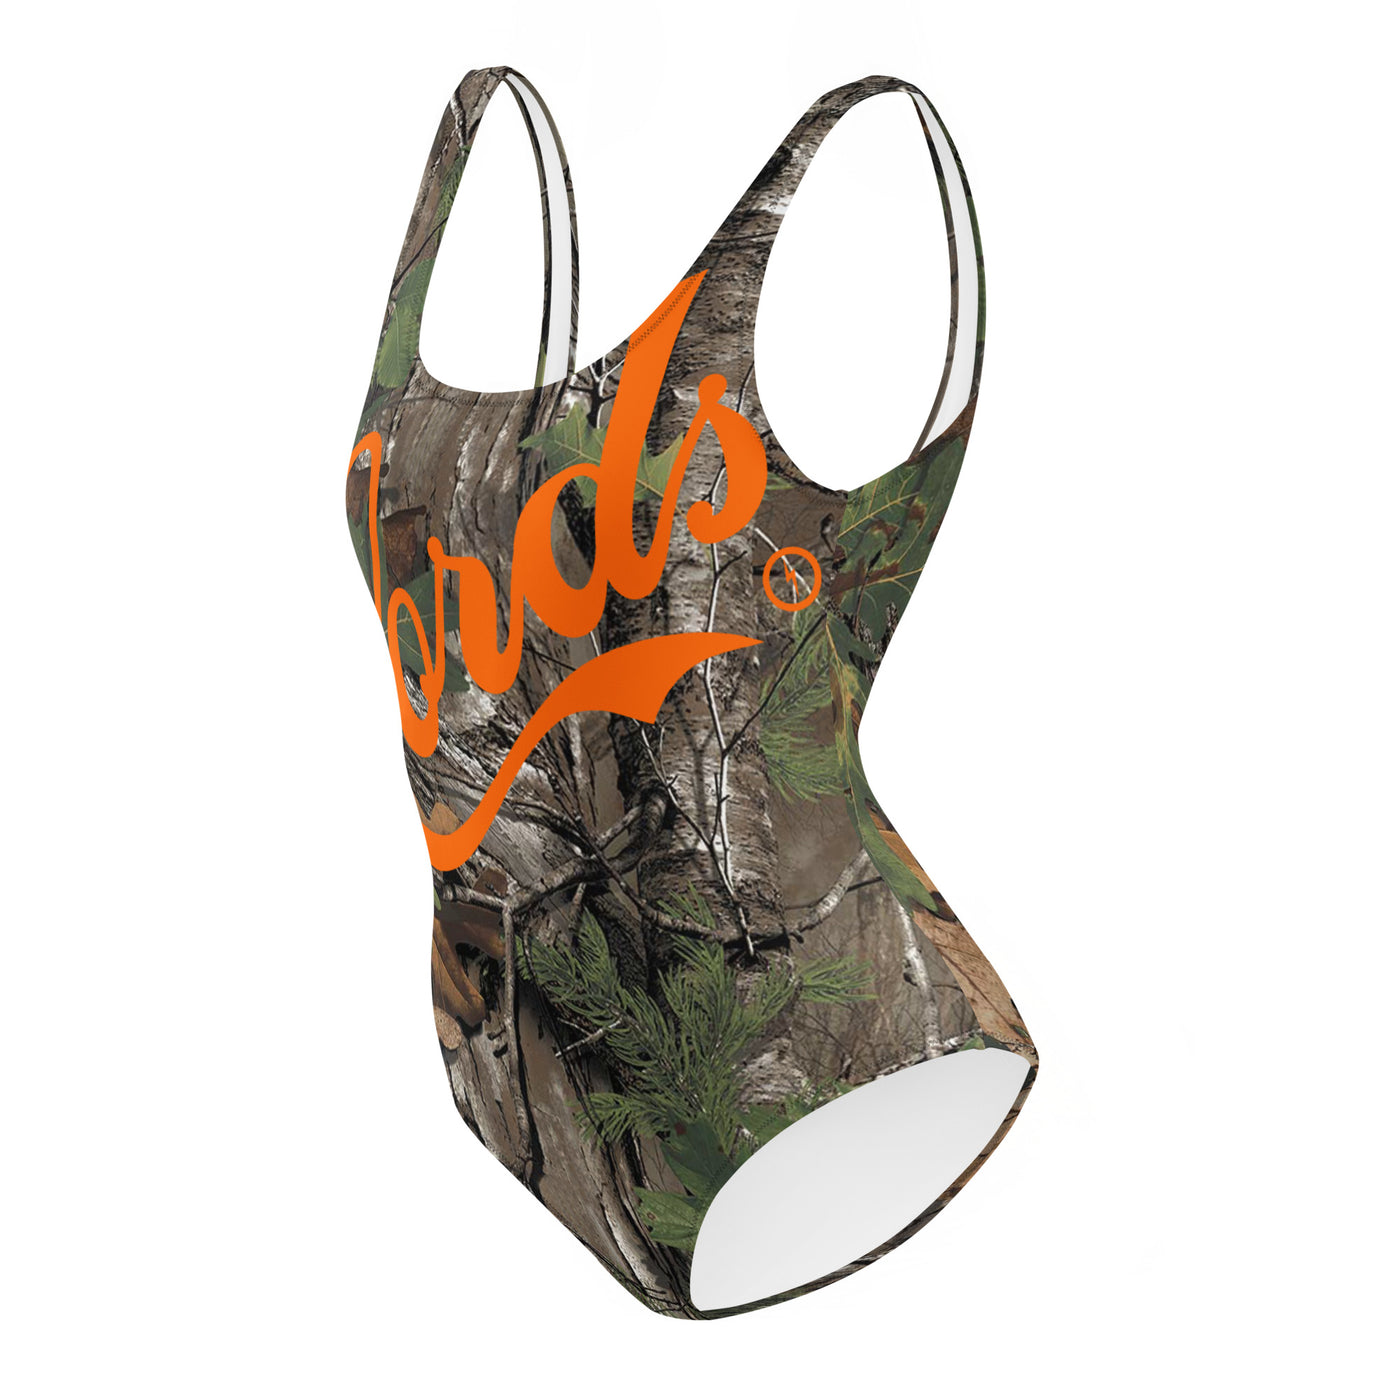 Team Lords Swimsuit - Realtree Camo